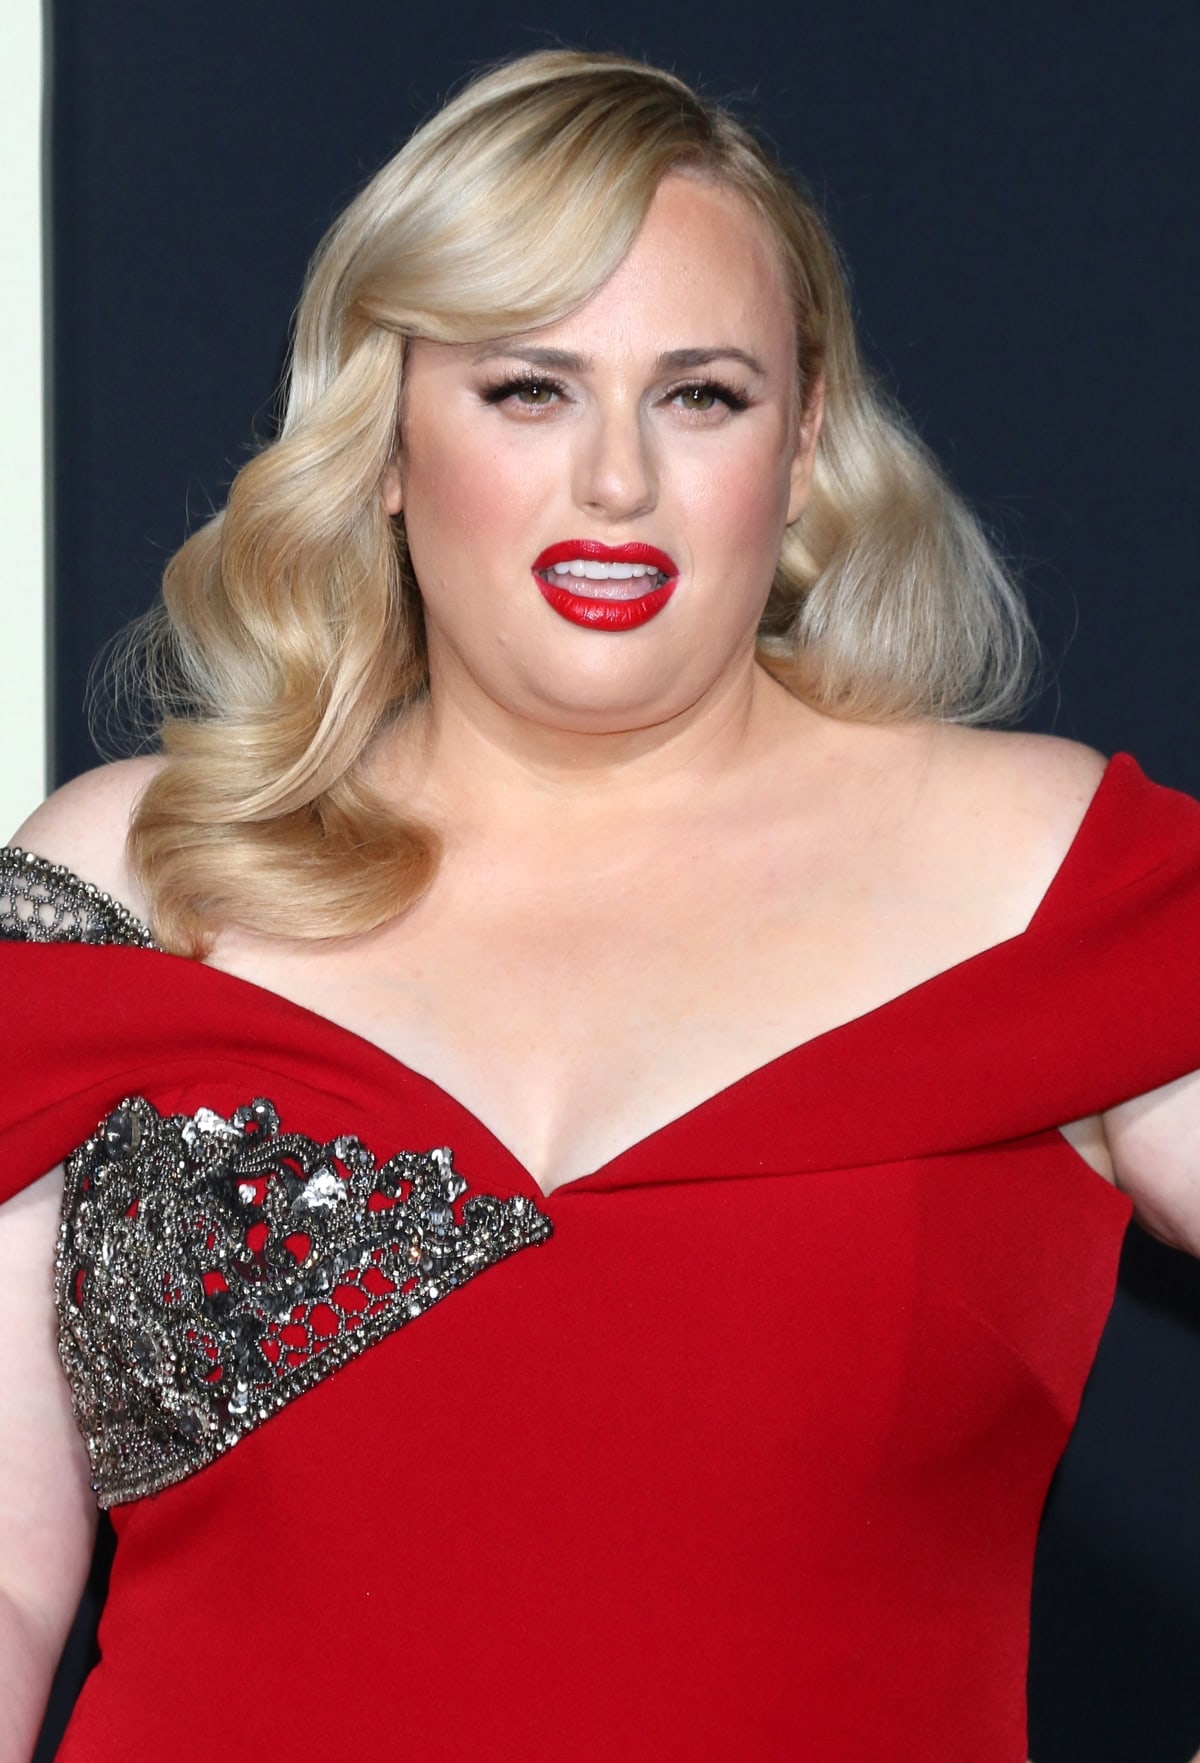 Rebel Wilson has been open about her fitness and weight loss journey